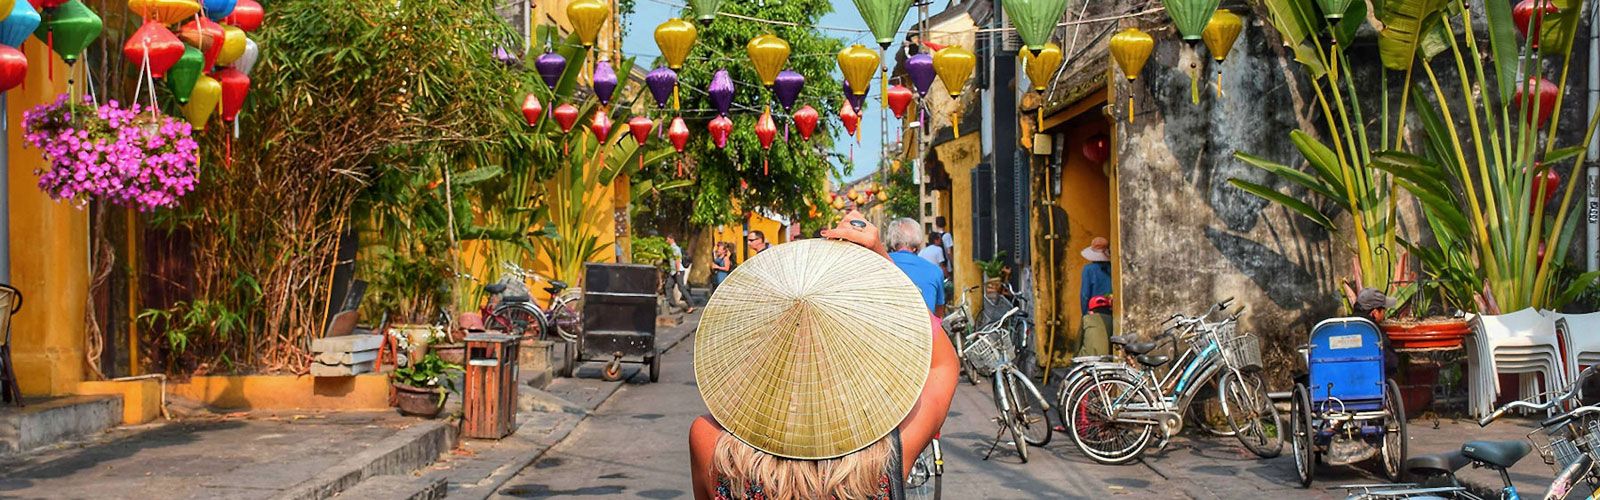 Hoi An  Travel Guide | Asianventure Tours